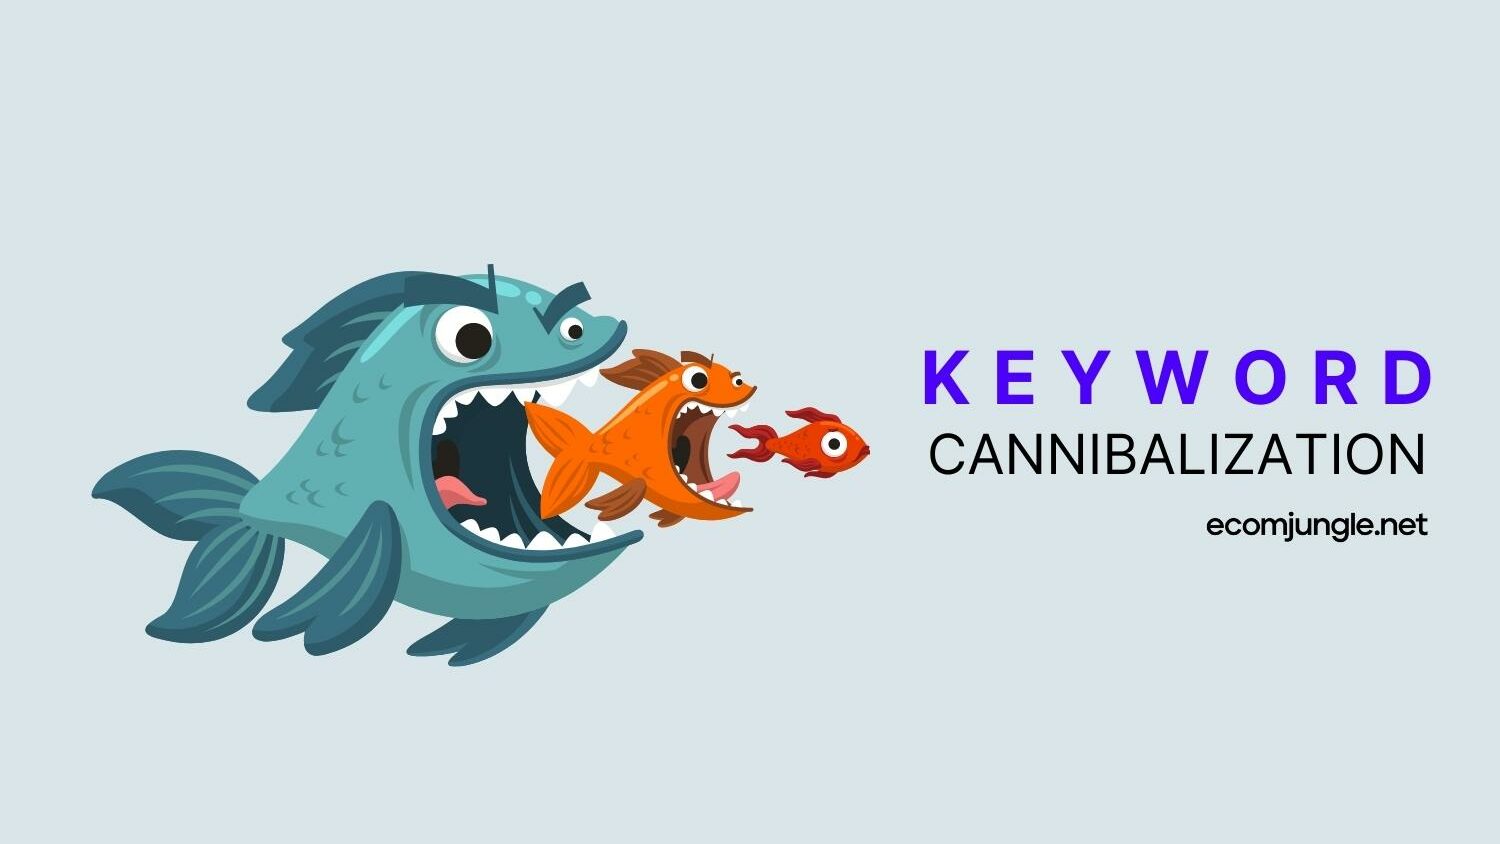 Assign keywords to each place in your website to avoid keyword cannibalization.